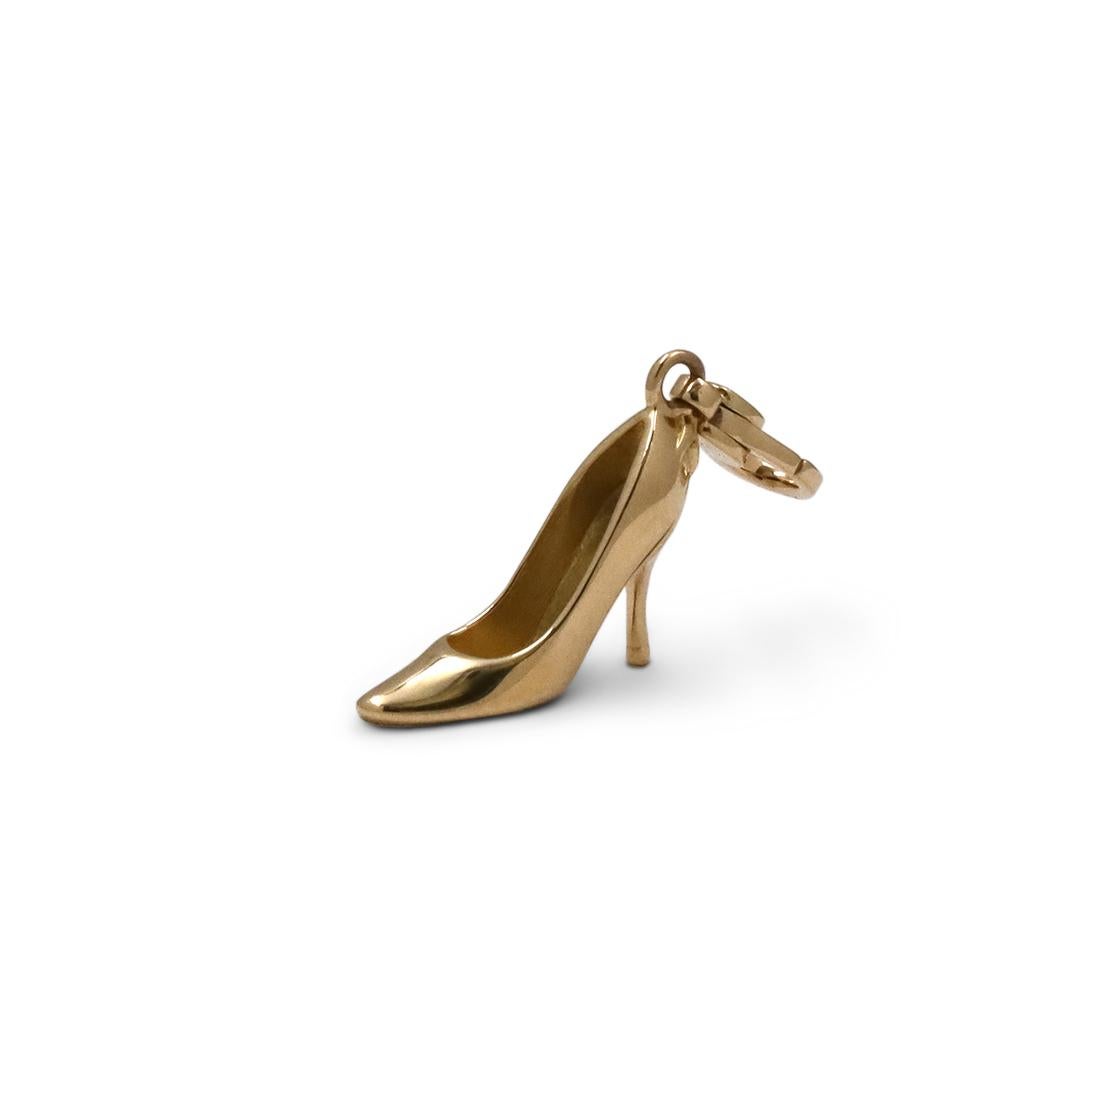 Authentic Louis Vuitton charm crafted in 18 karat yellow gold. A precious and delicate high heel measuring 23mm in length and 15mm in width. Signed LV, 750, with serial number and hallmark. The charm is not presented with the original Louis Vuitton